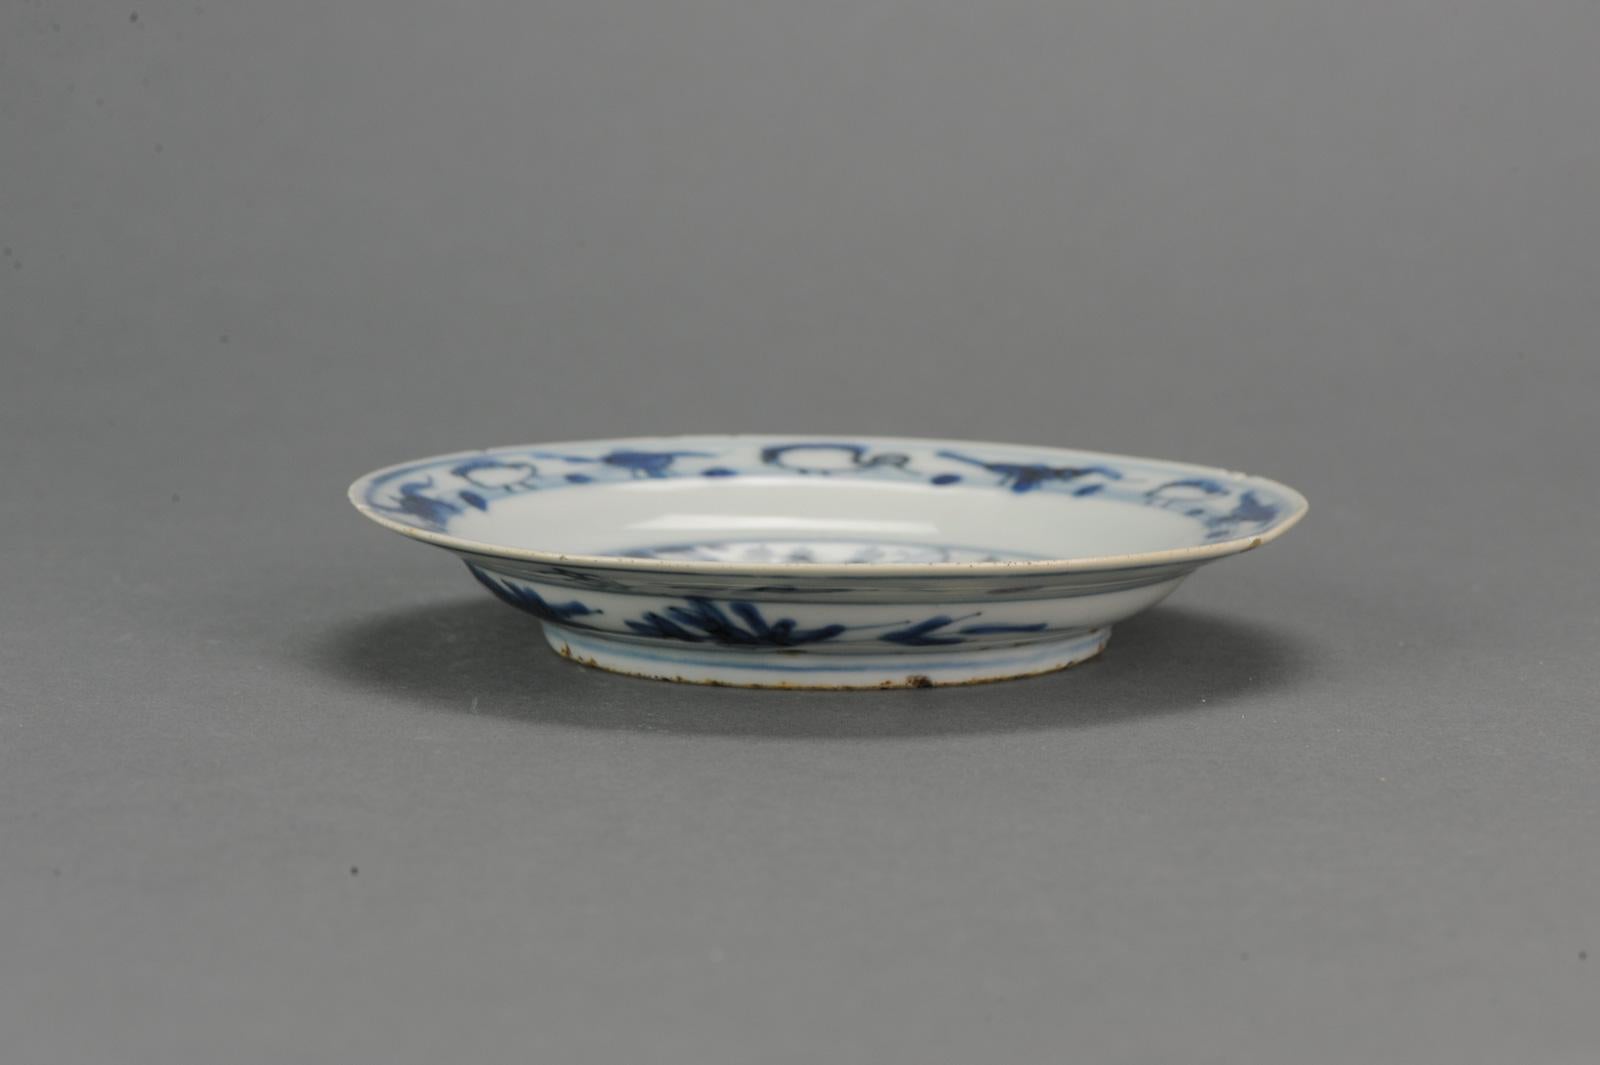 A very nicely decorated plate from ca 1580-1630. The dish is beautifully designed.

Additional information:
Material: Porcelain & Pottery
Region of Origin: China
Country of Manufacturing: China
Period: 16th century, 17th century Ming (1368 -